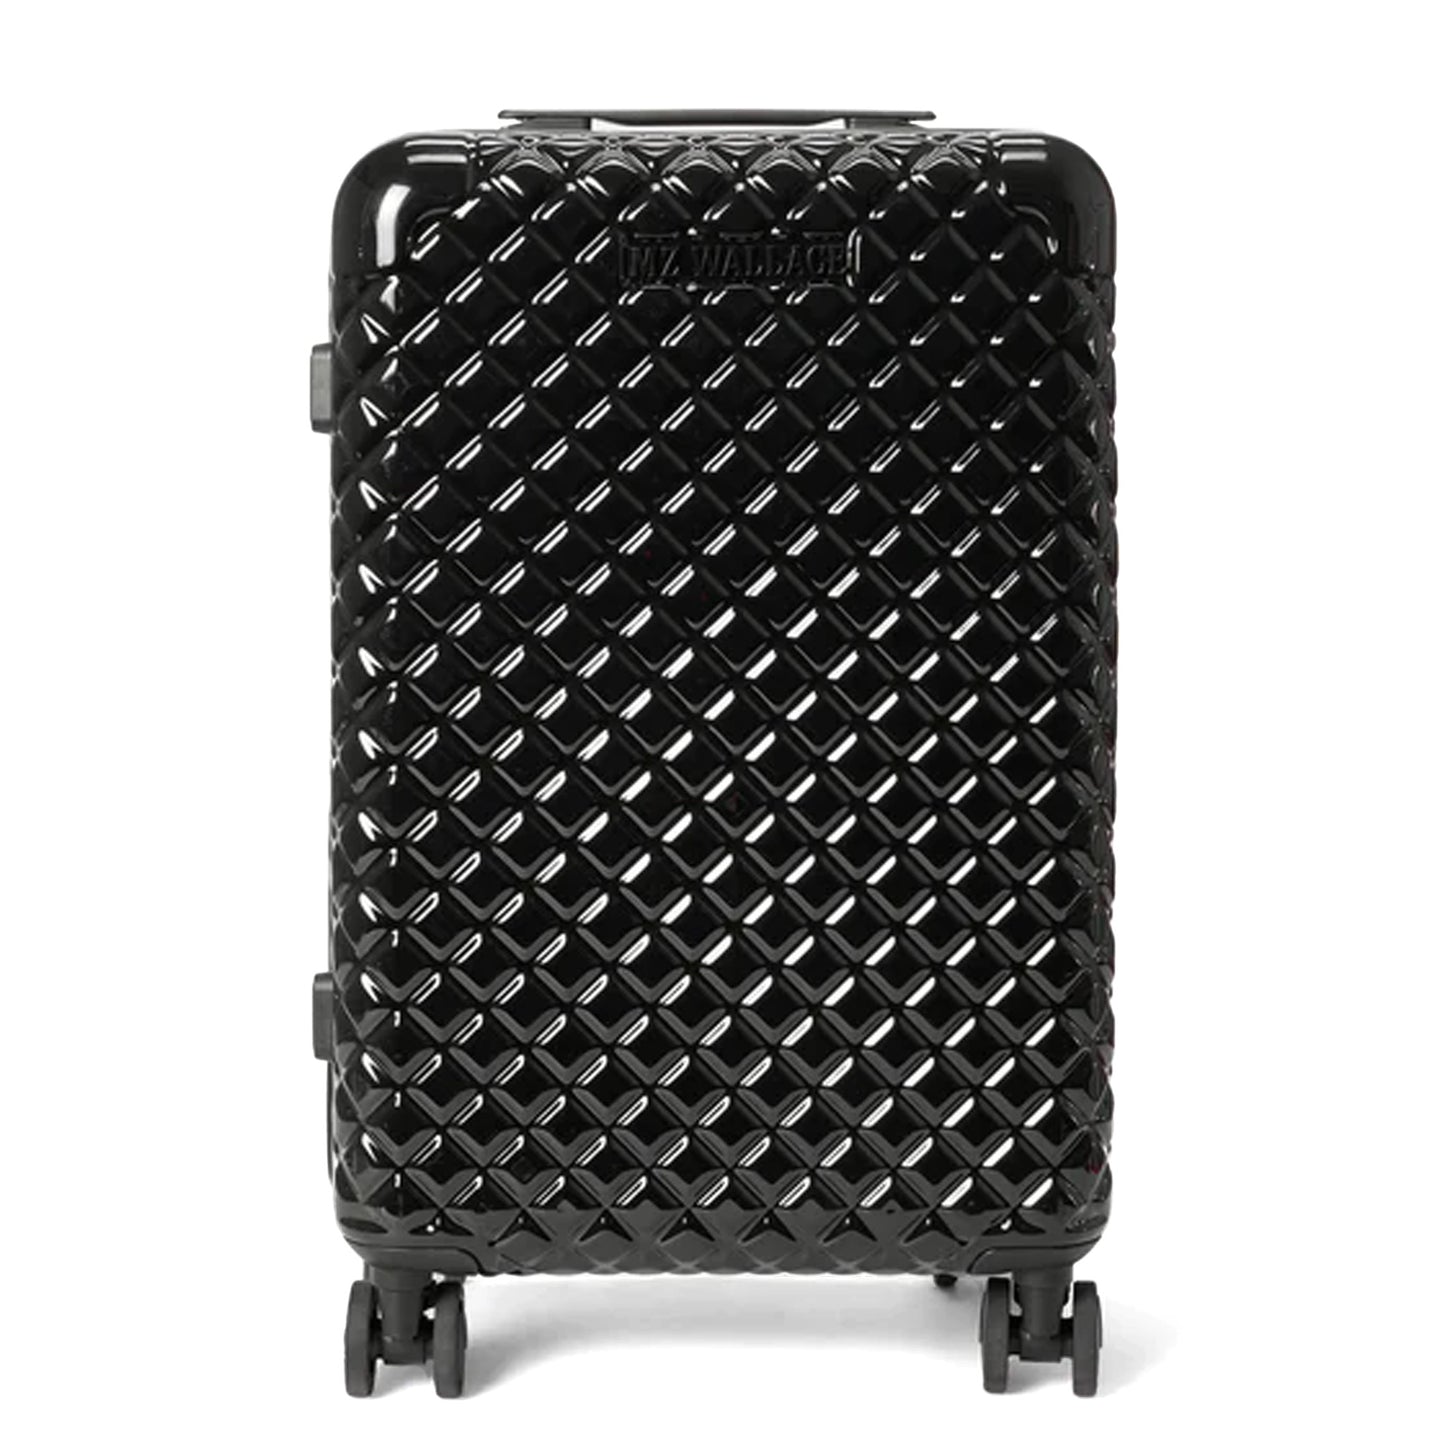 Black Lacquer International Carry-On Luggage